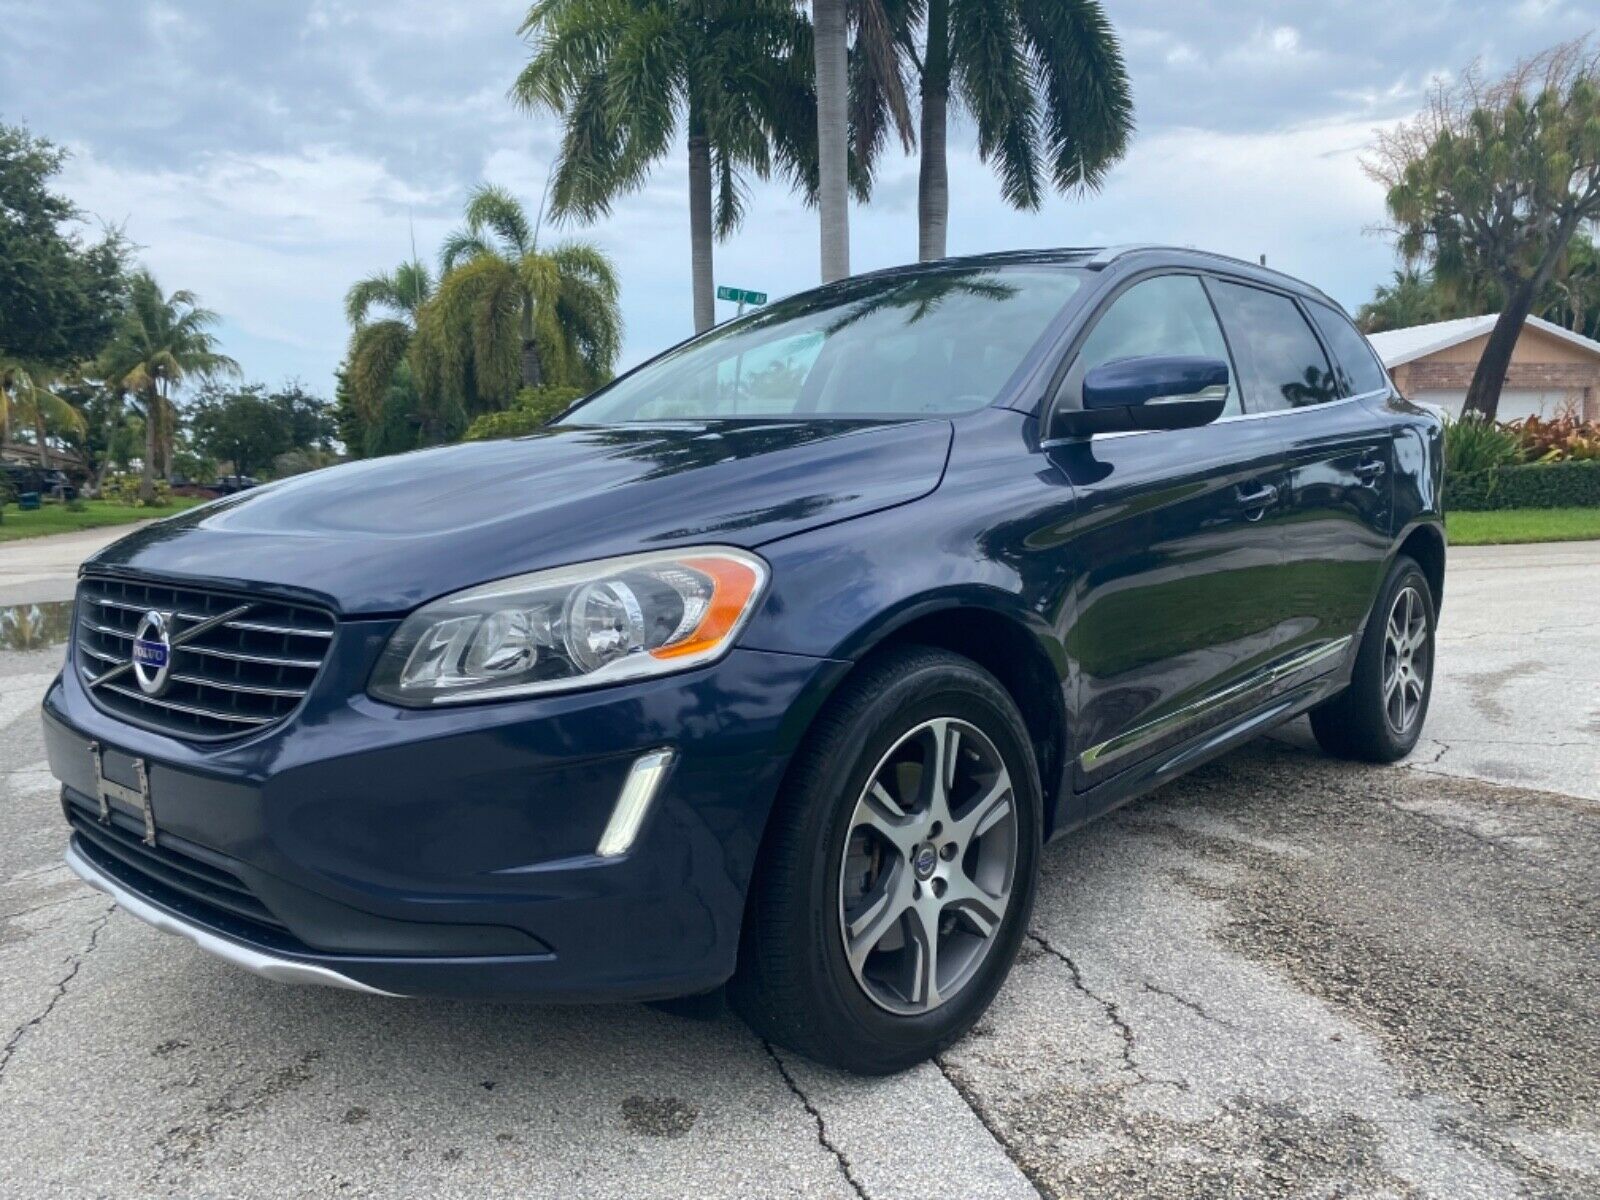 2014 Volvo Xc60  2014 Volvo Xc60 Awd 4dr  Clean Car Fax 0 Accidents Runs Great Call 954 937 8271